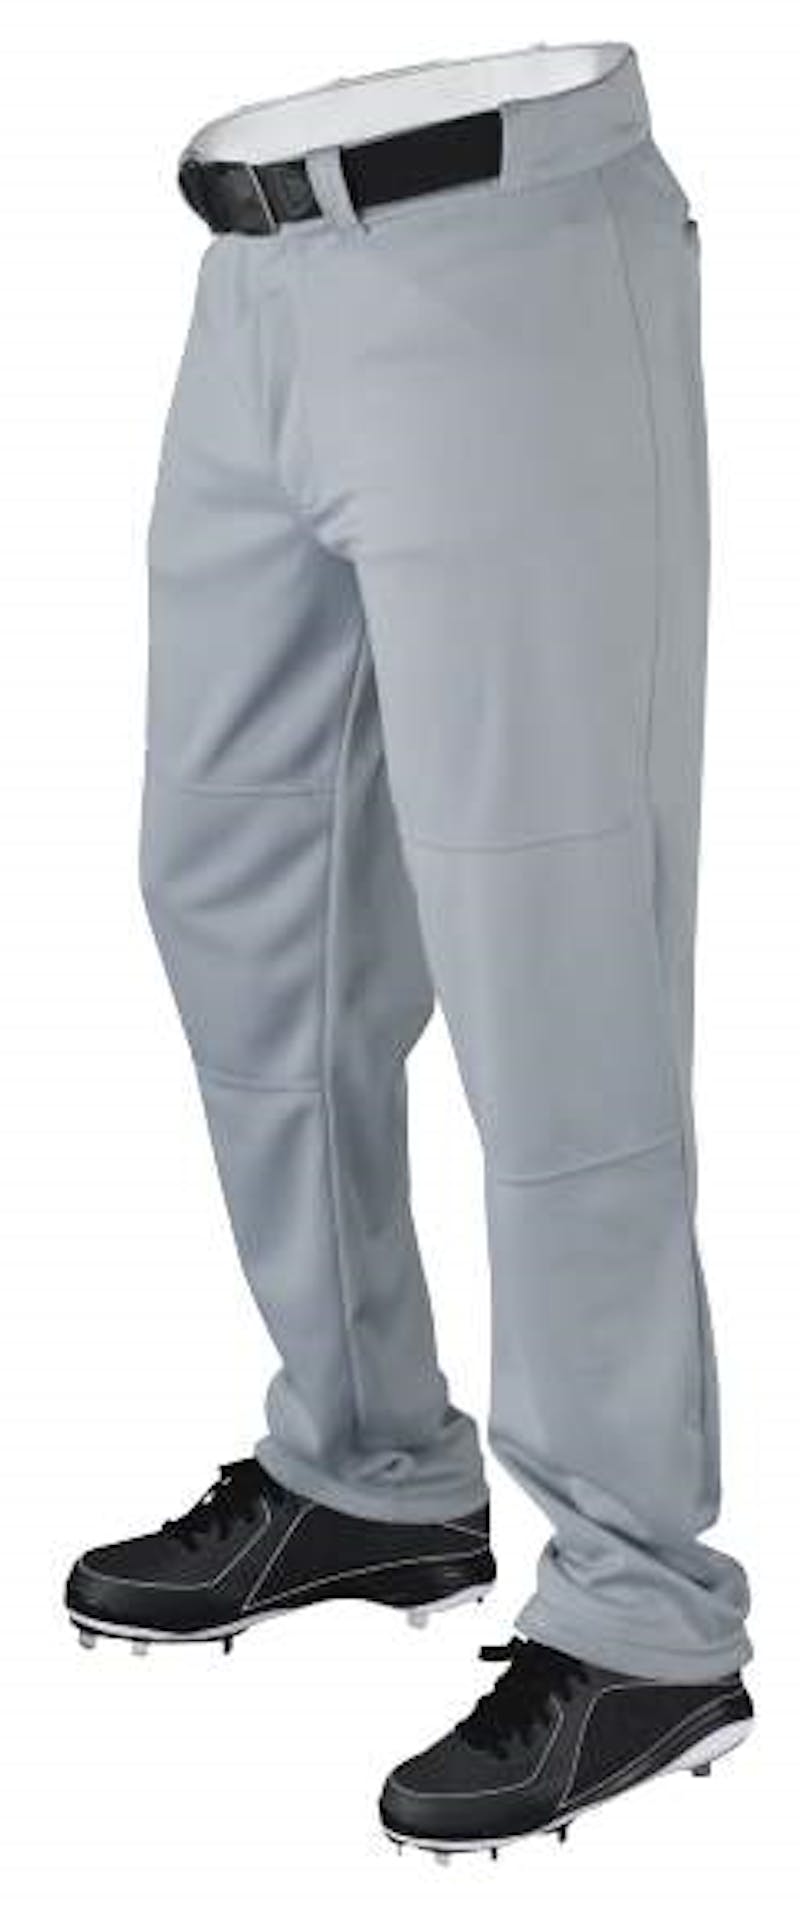 NEW Wilson Men's Relaxed Fit Gray Baseball Softball Pants Size Small NWT 